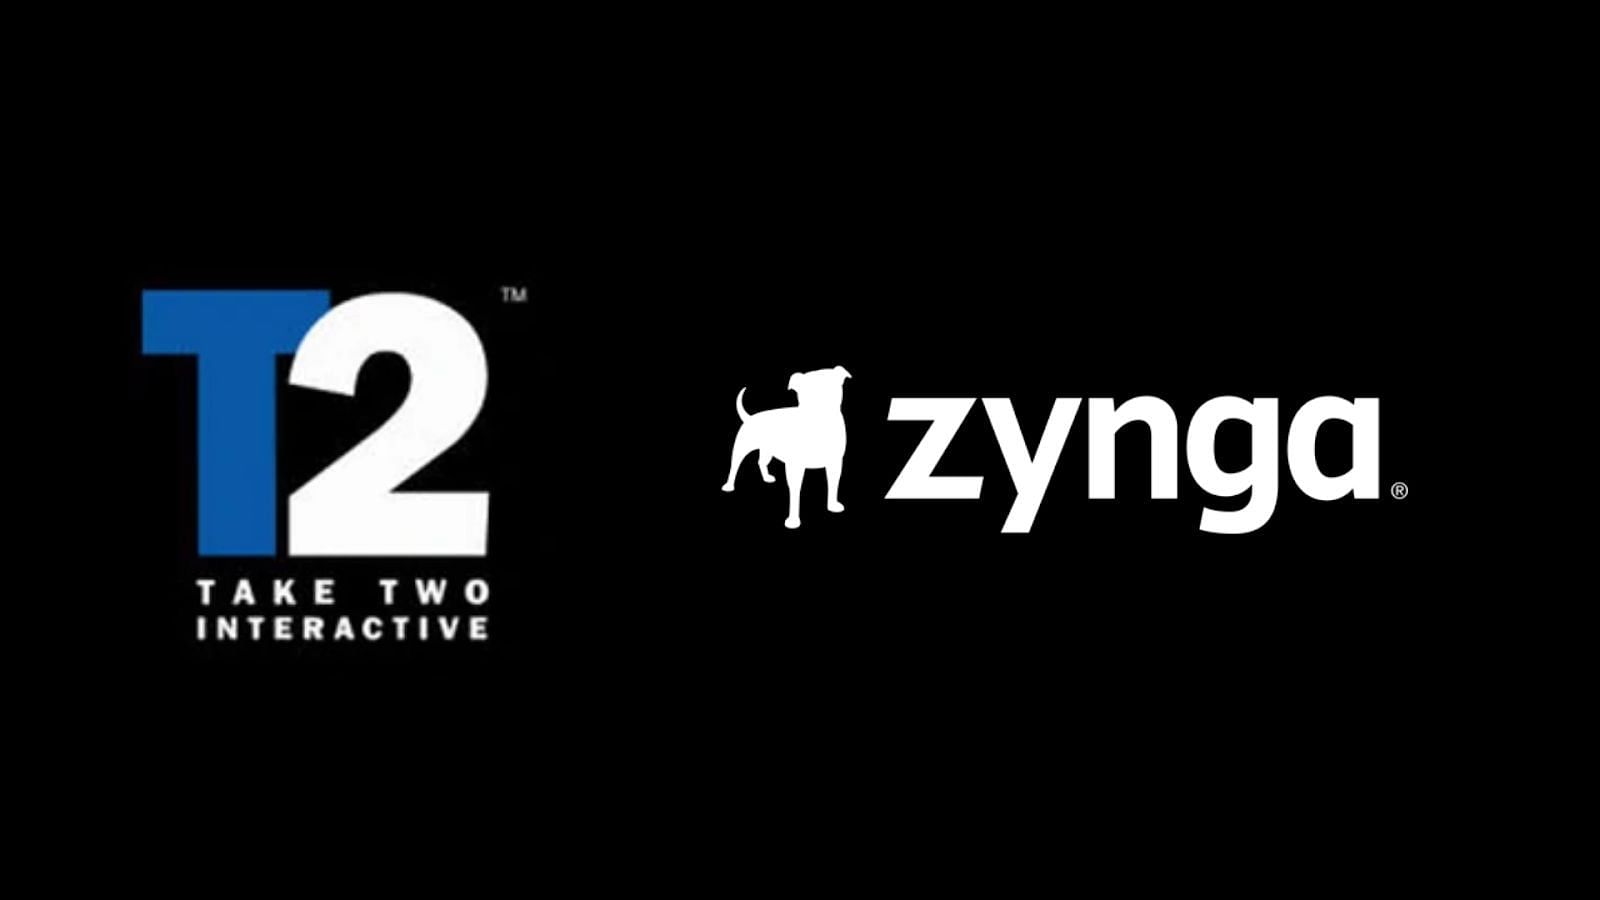 Take-Two has acquired Zynga for $12.7bn (Image by Sportskeeda)